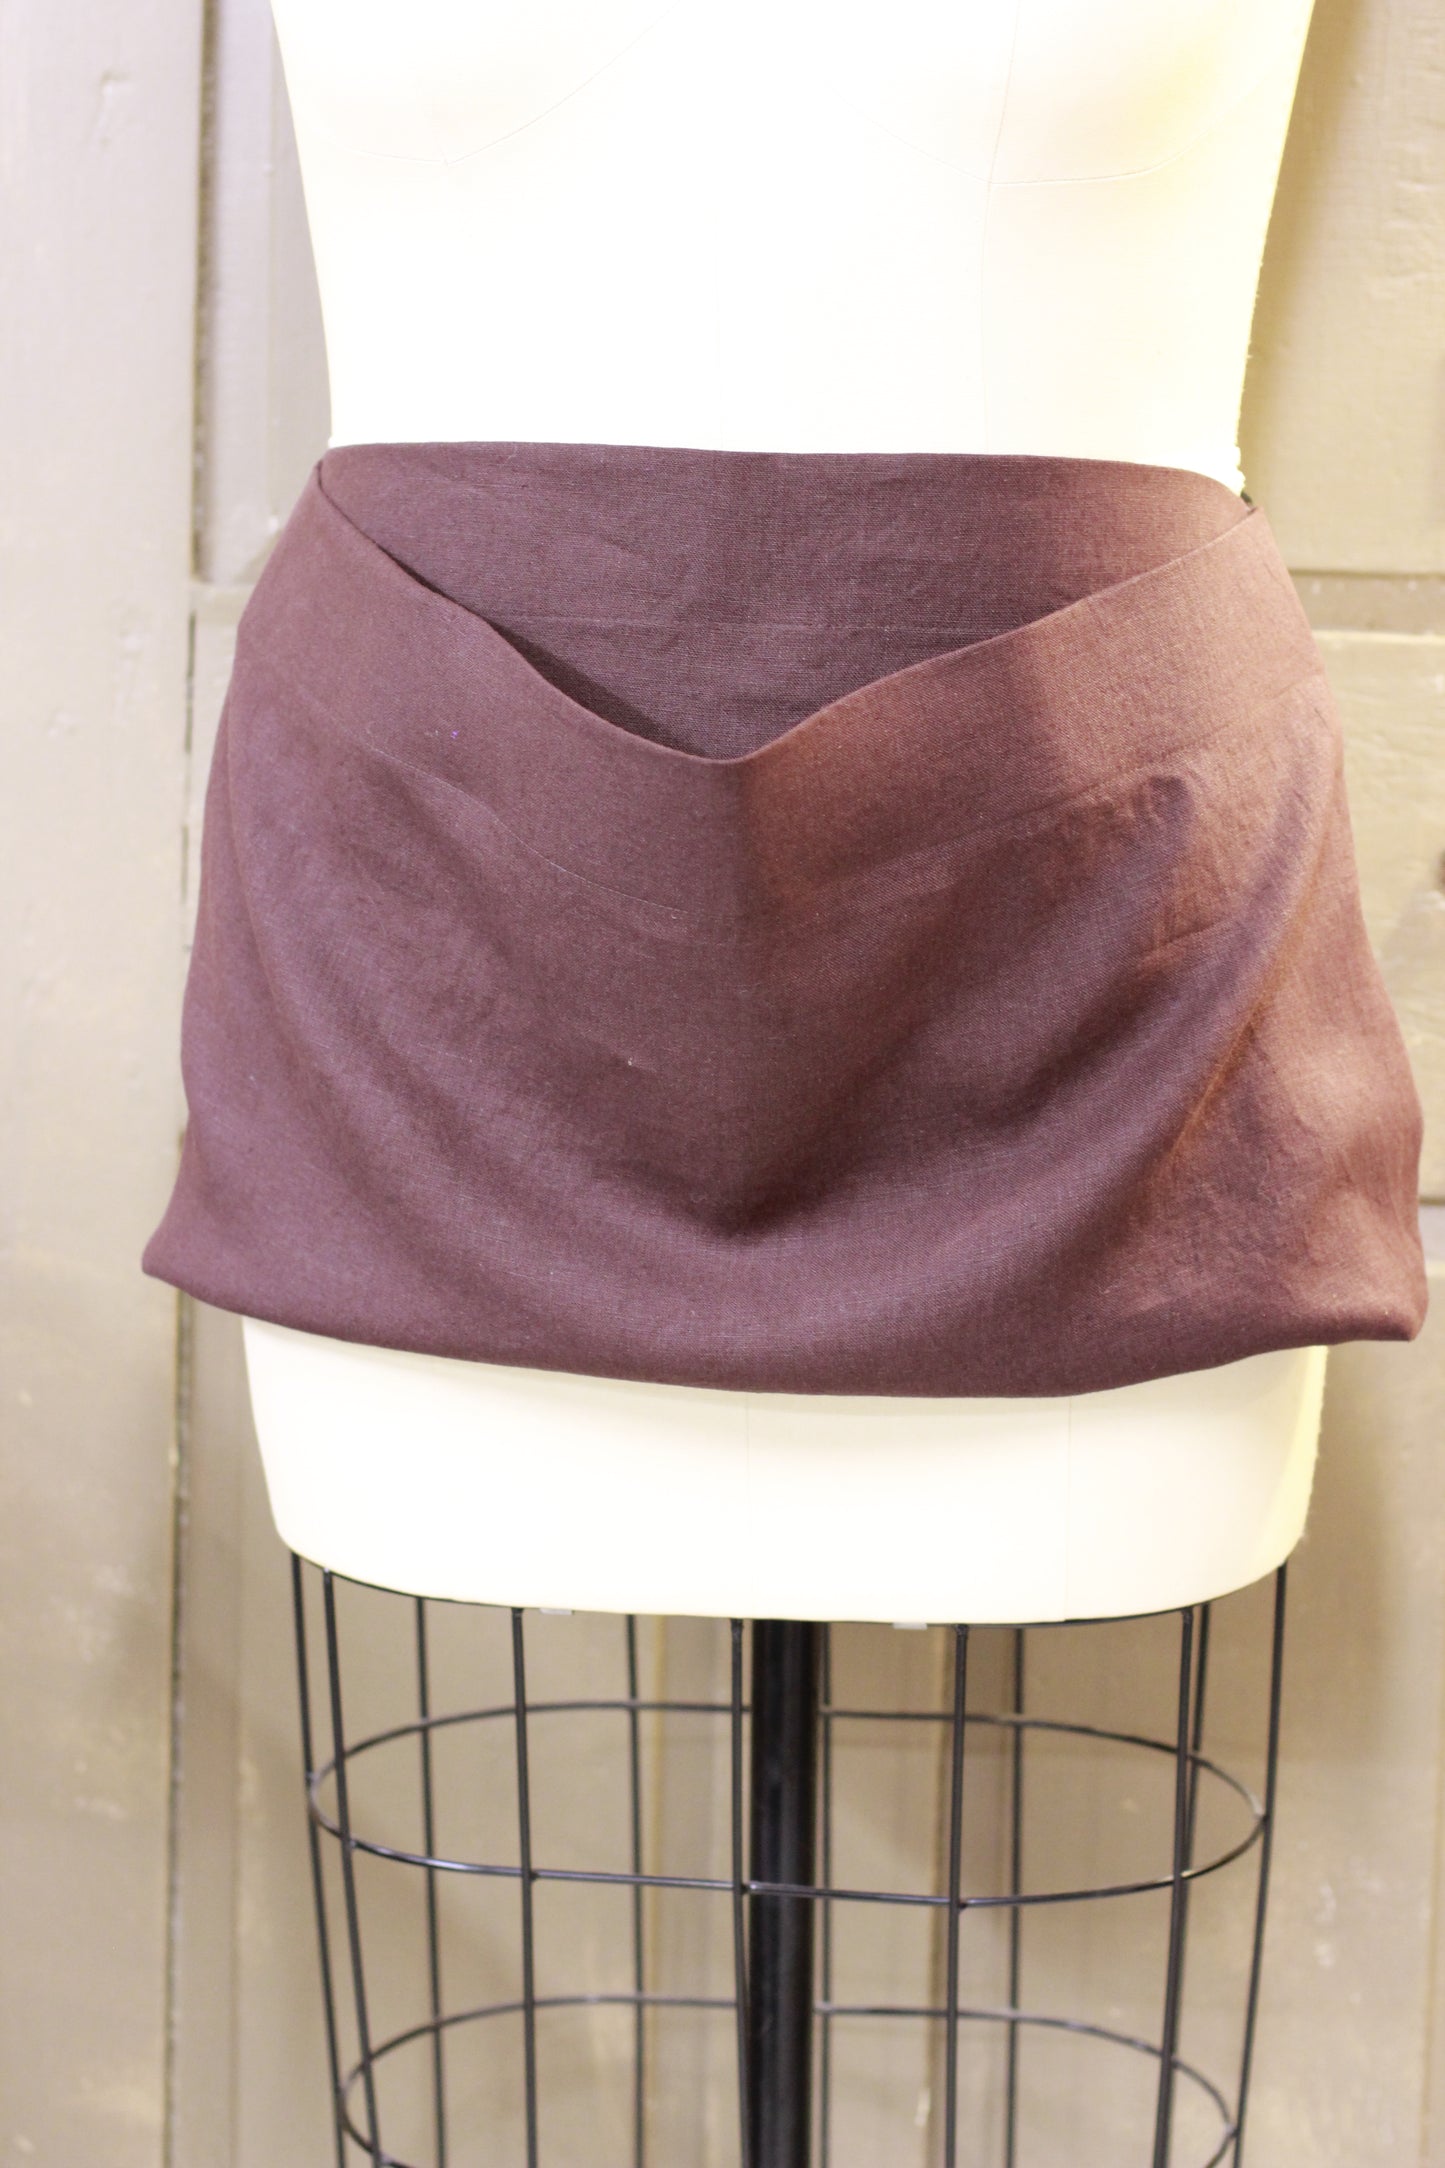 Linen Pouch Apron in Chocolate Linen